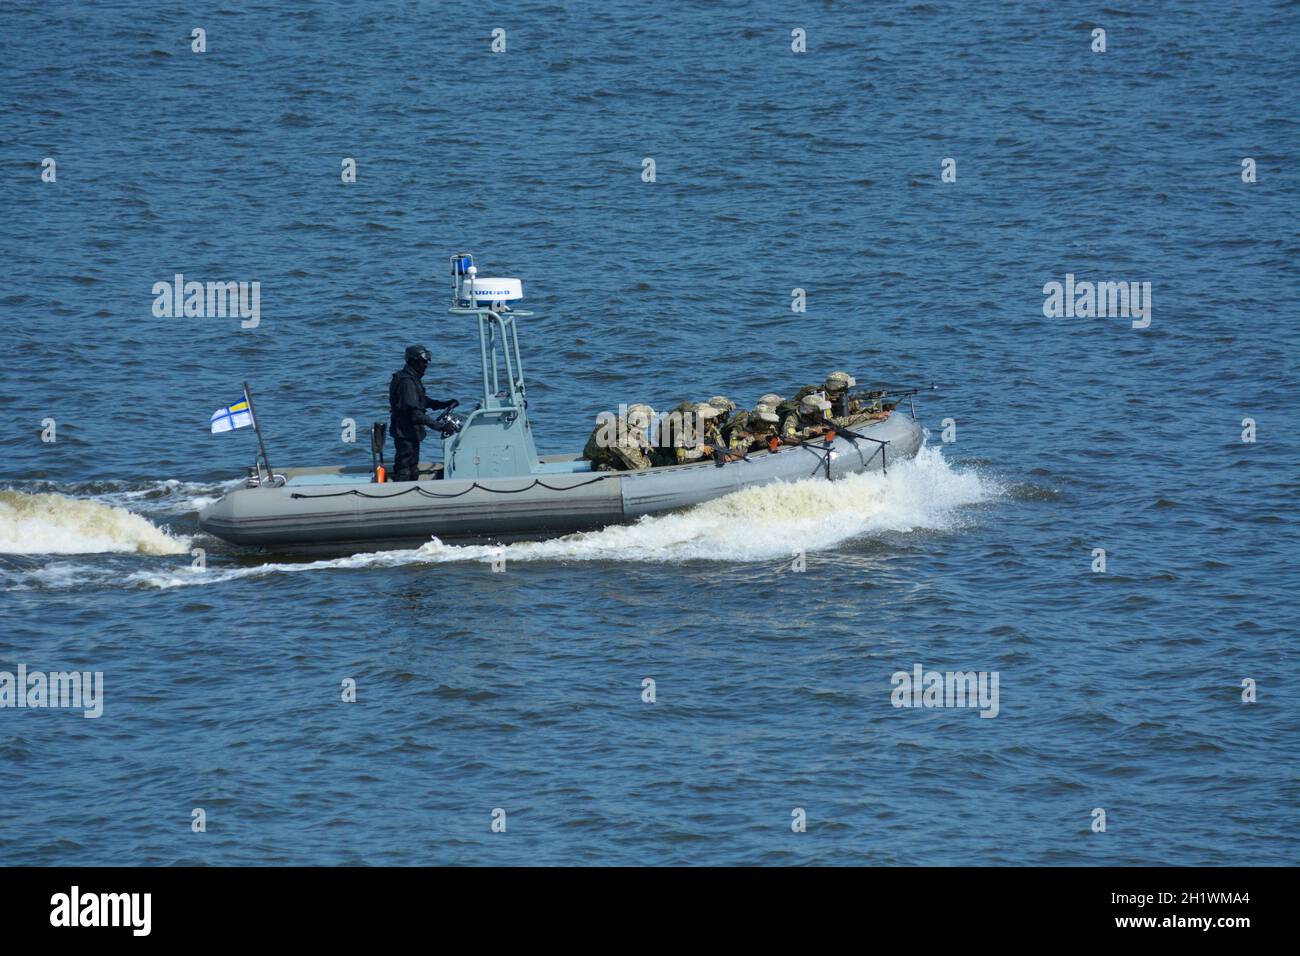 Miltary boat floating on the water, soldiers of Seaborne Special Forces aboard armed with machine guns. Military parade dedicated to Independence Day. Stock Photo